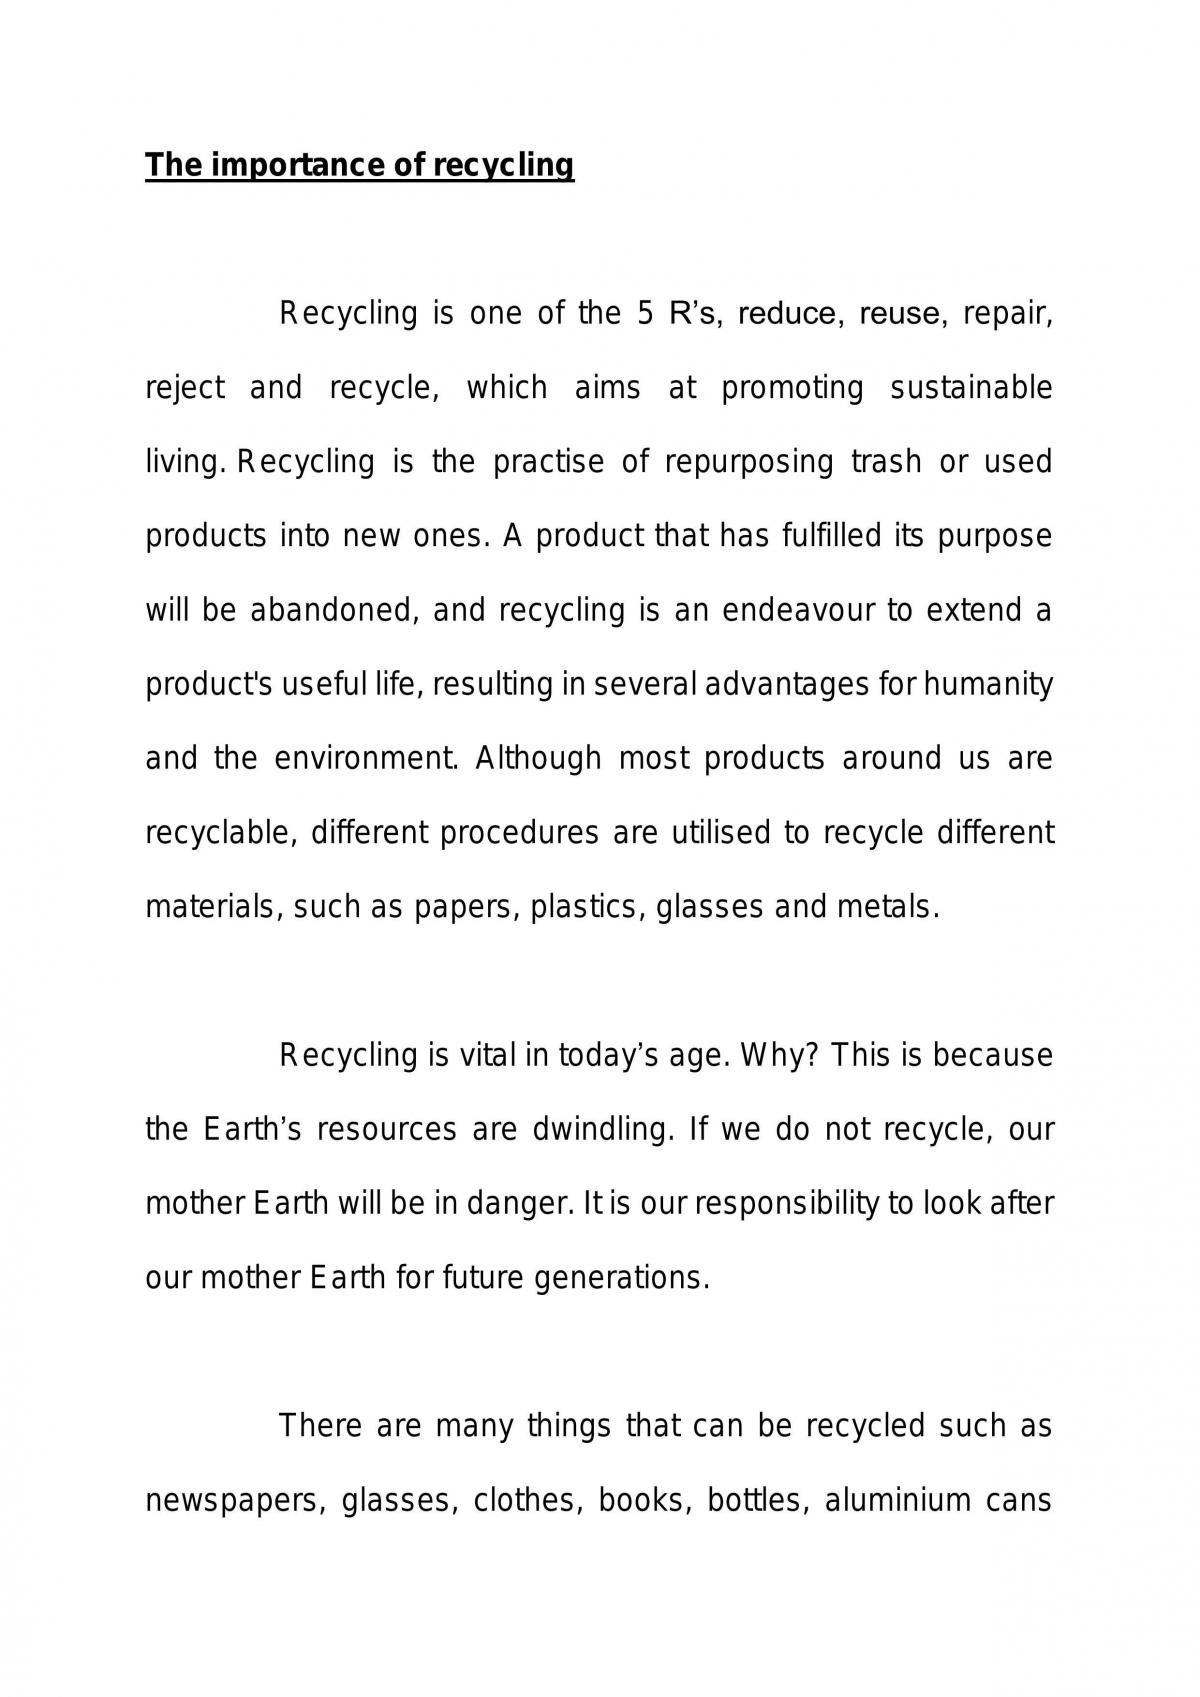 research paper about recycling